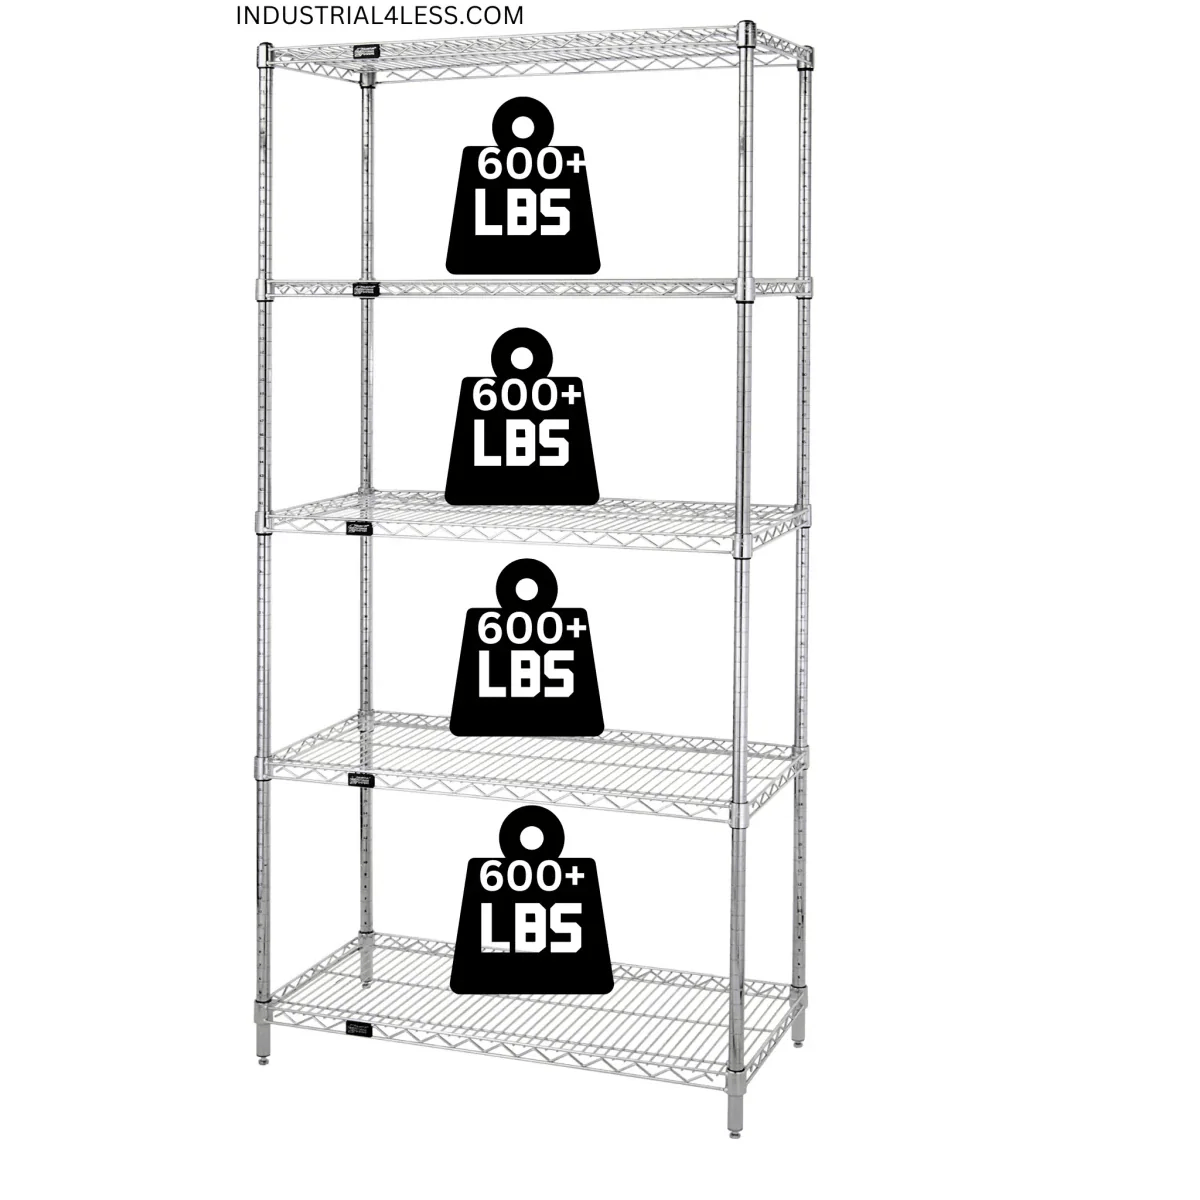 24" x 30" Stainless Steel Wire Shelving Unit - Industrial 4 Less - 24305S-5